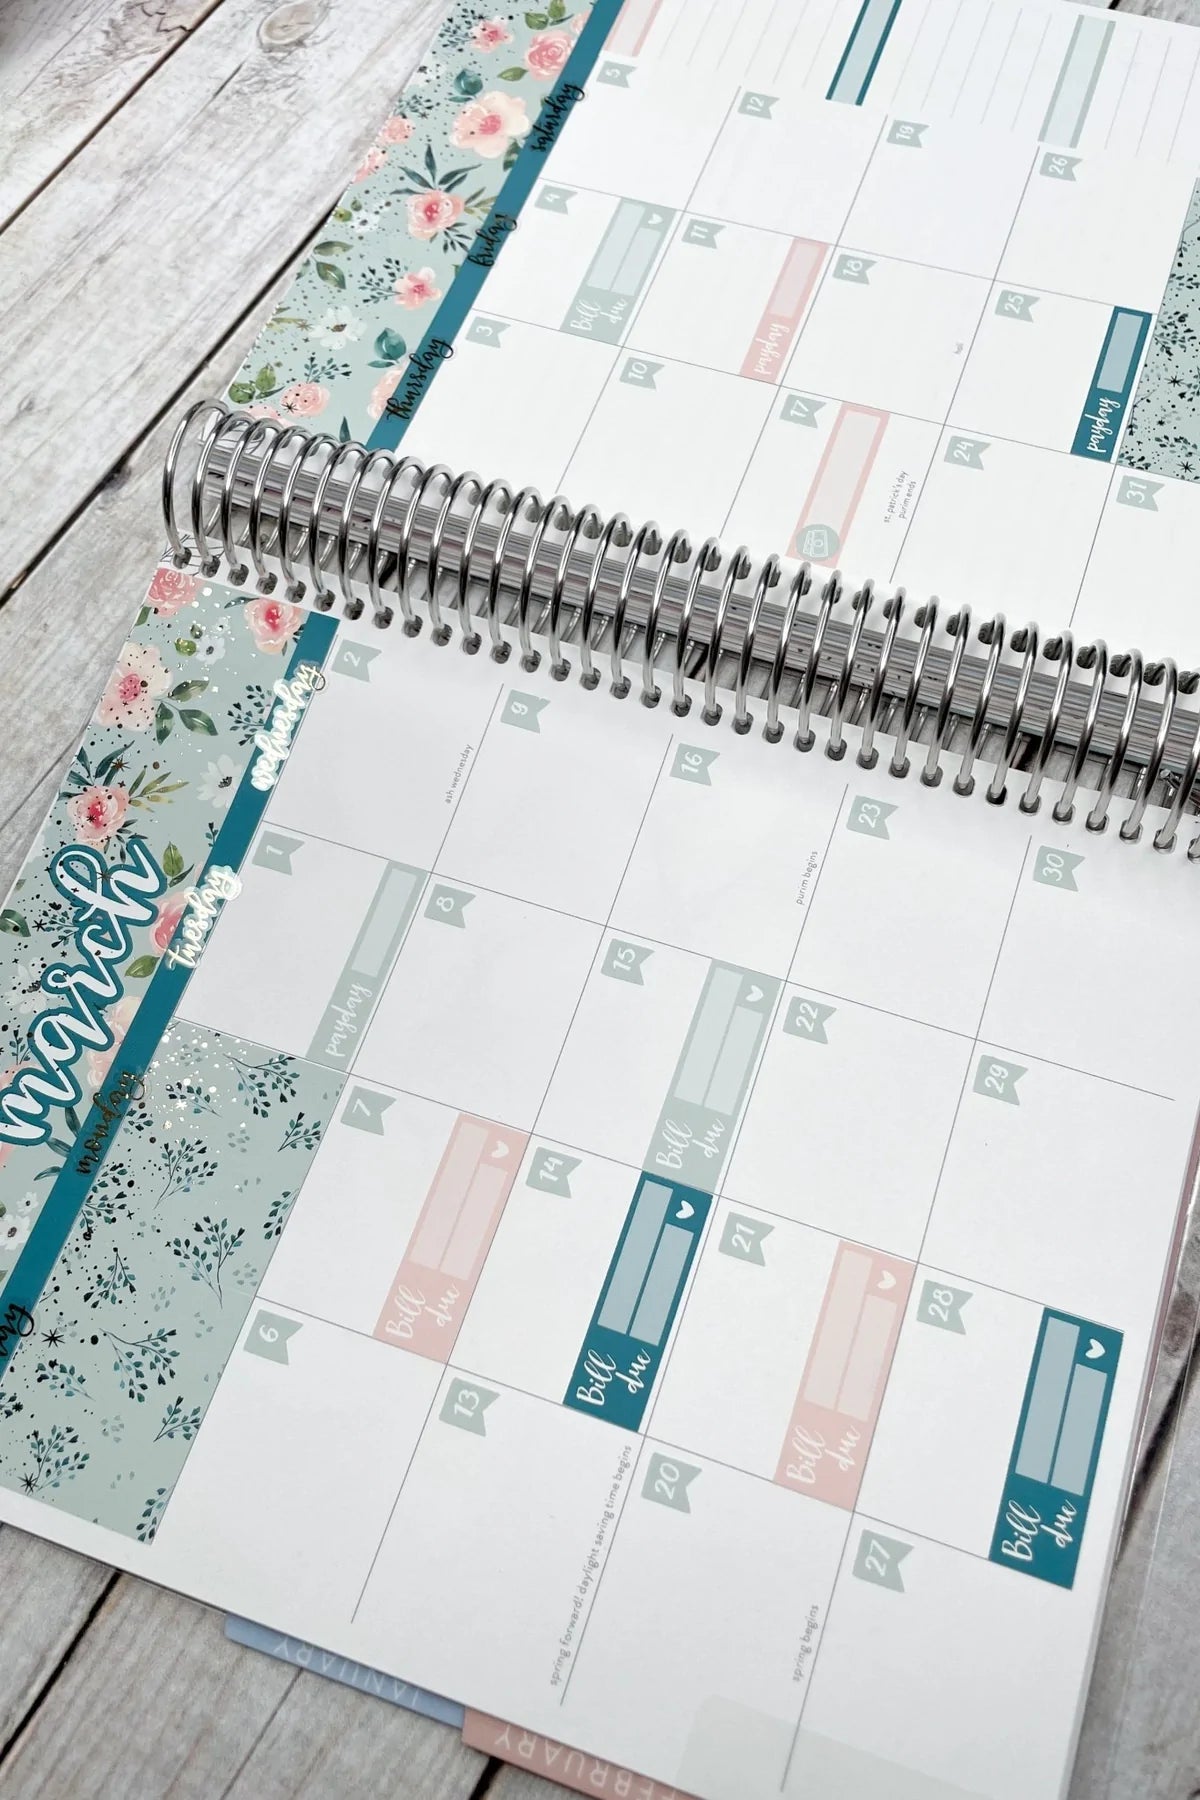 How to enjoy using your paper planner? - Station Stickers